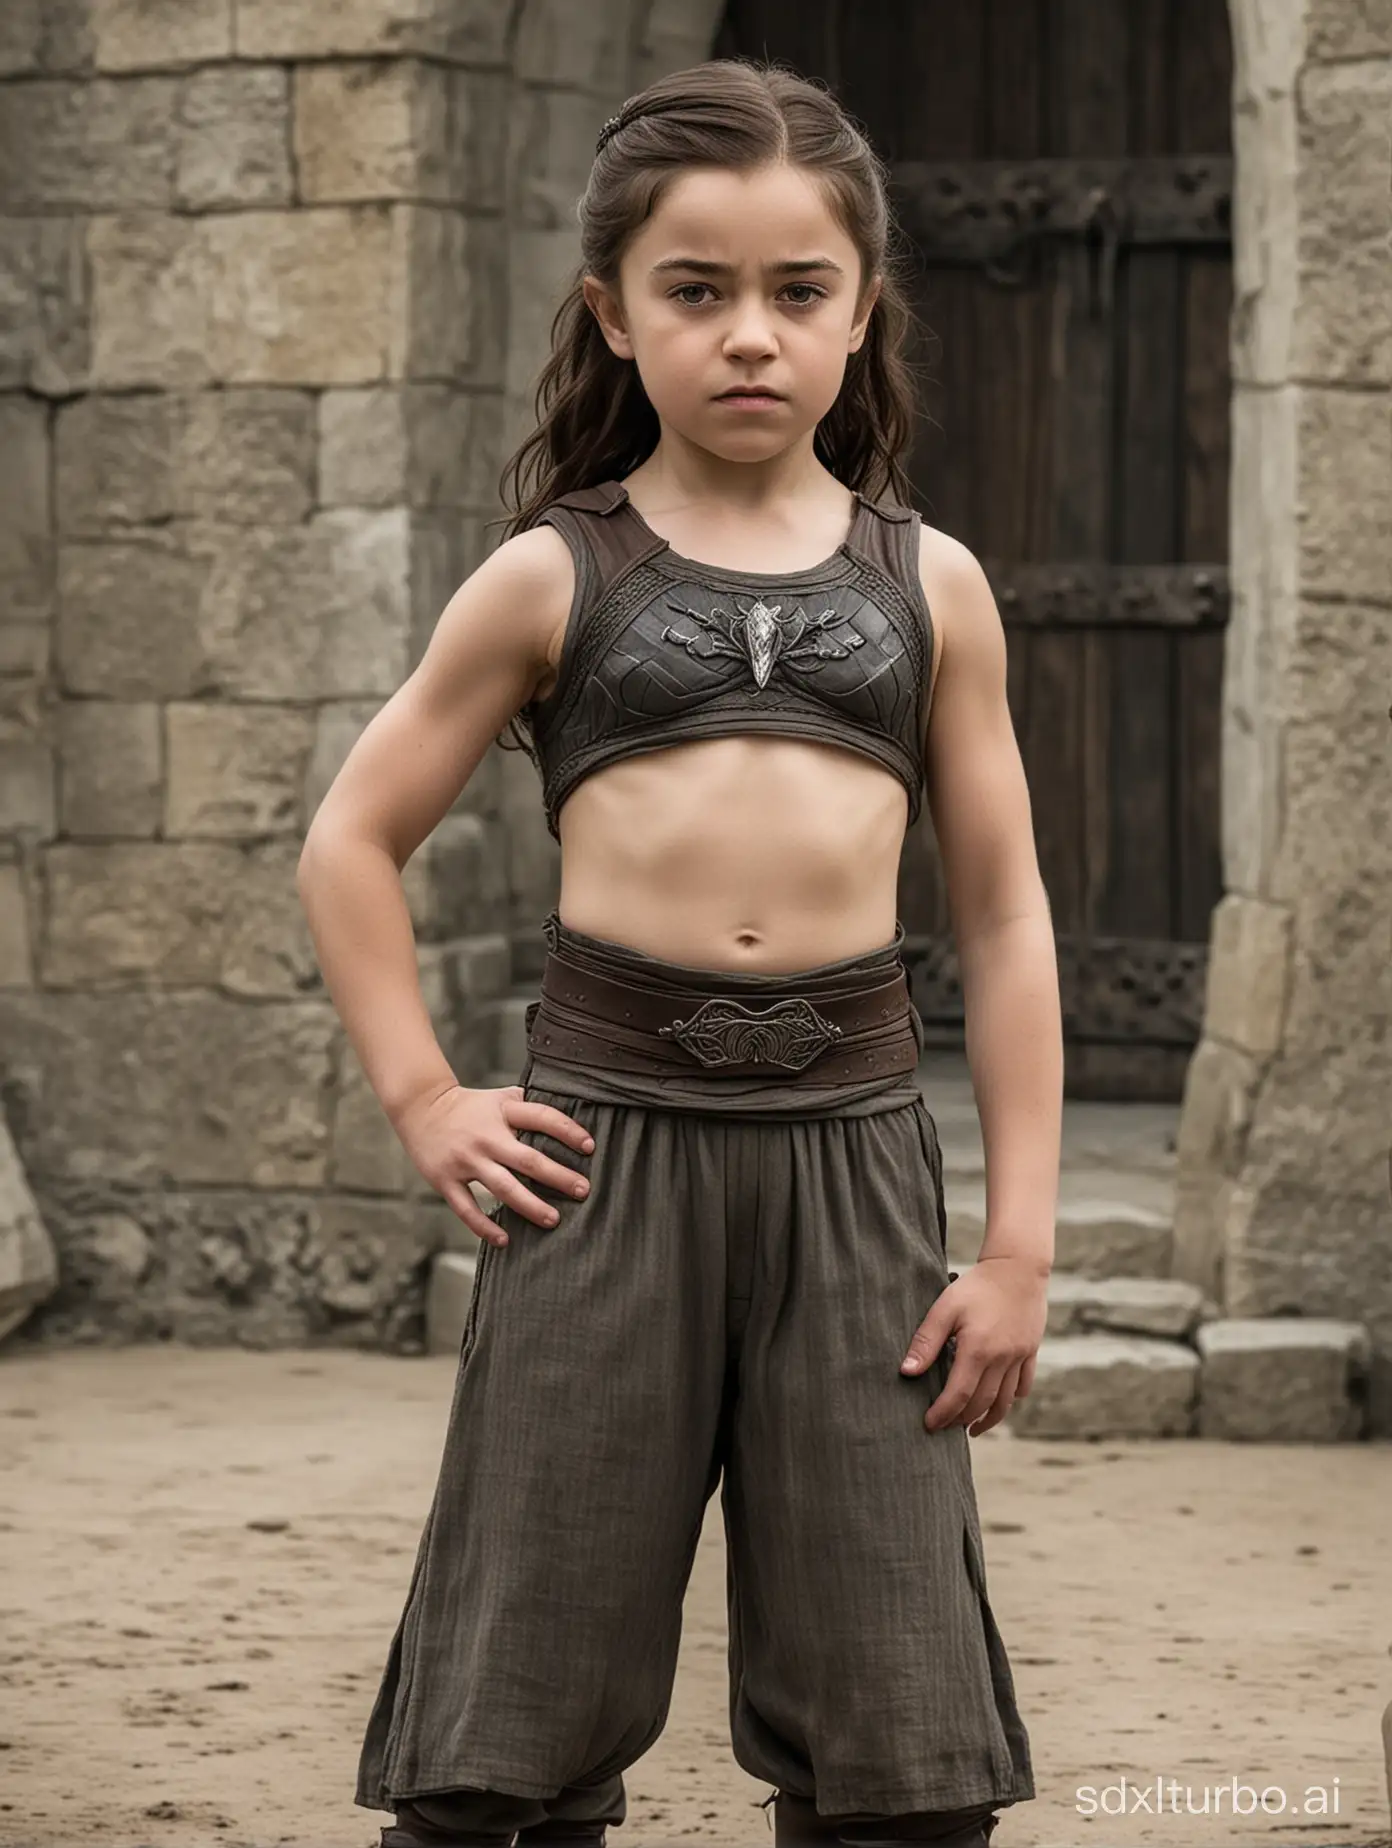 Aria Stark at 7 years old, showing her very muscular abs, in Game of Thrones